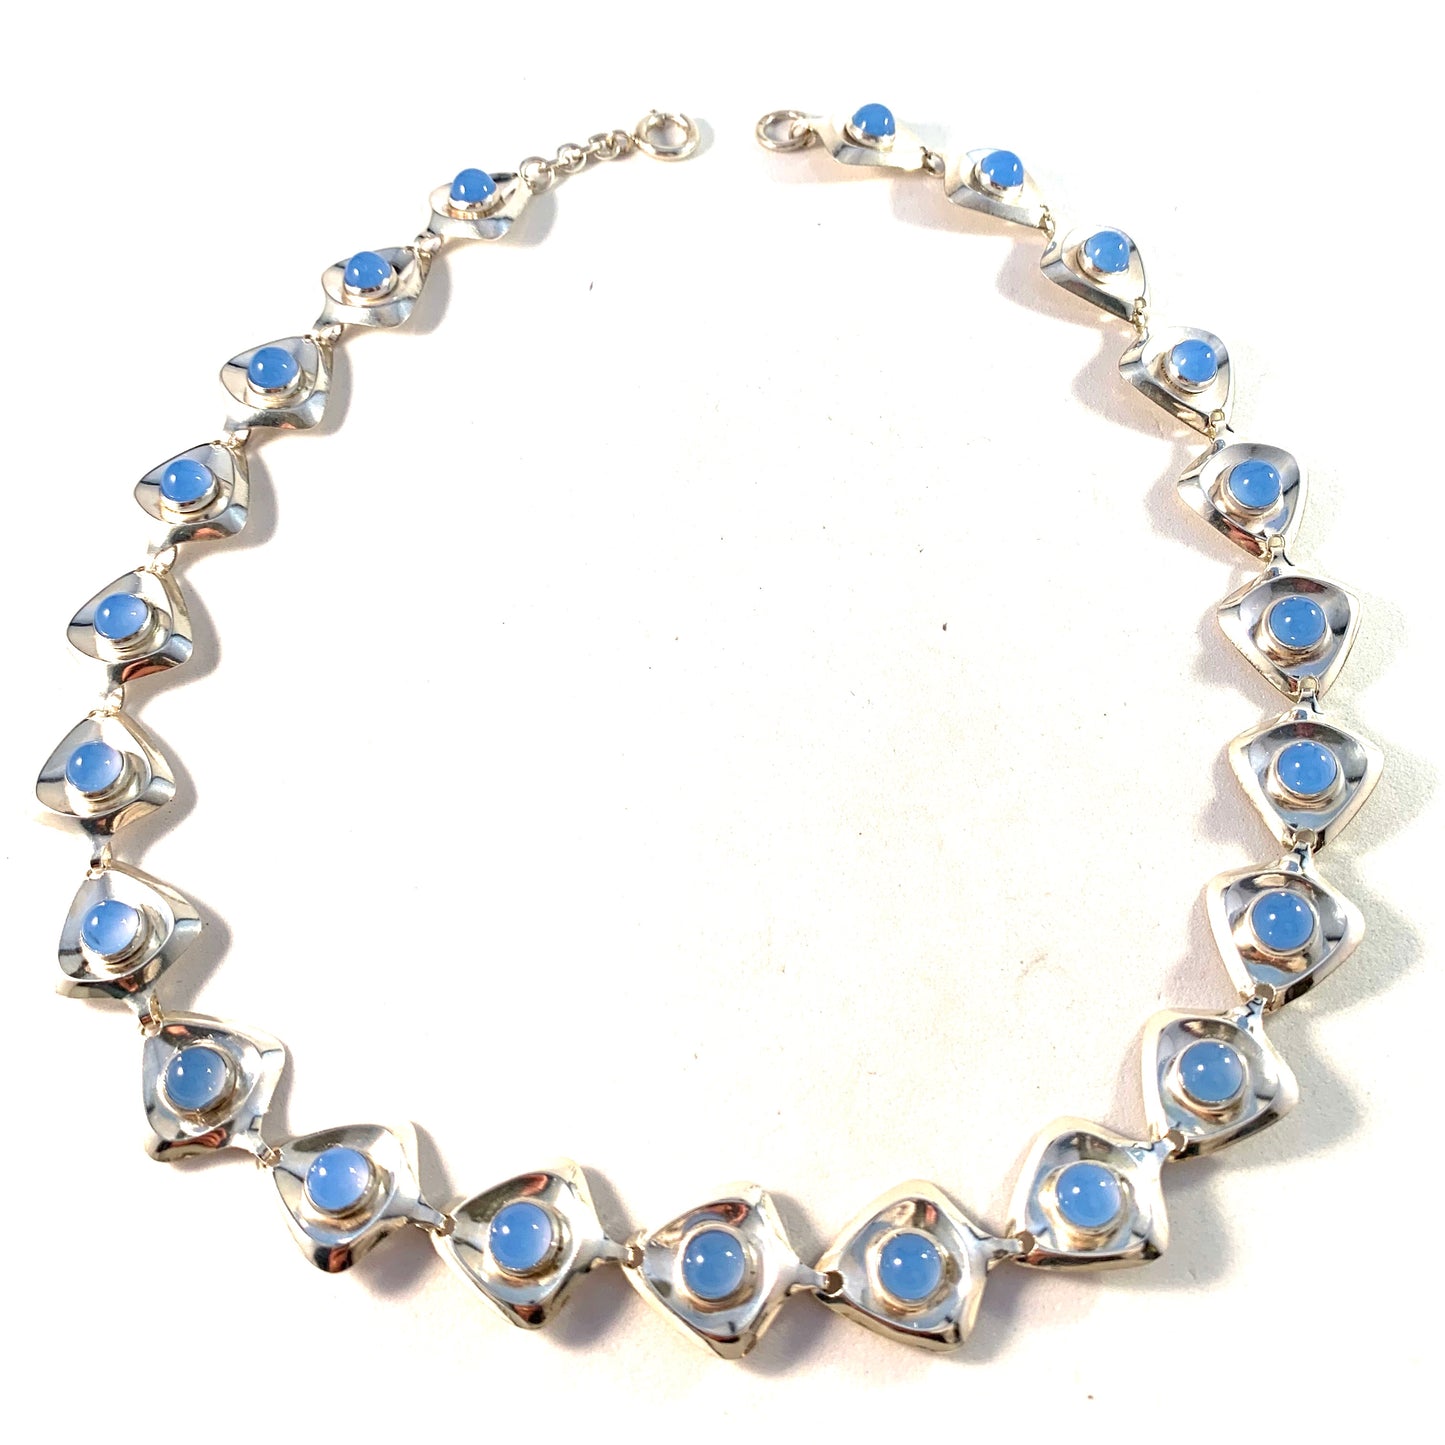 Swedish Import 1950-60s Mid Century Sterling Silver Chalcedony Necklace.